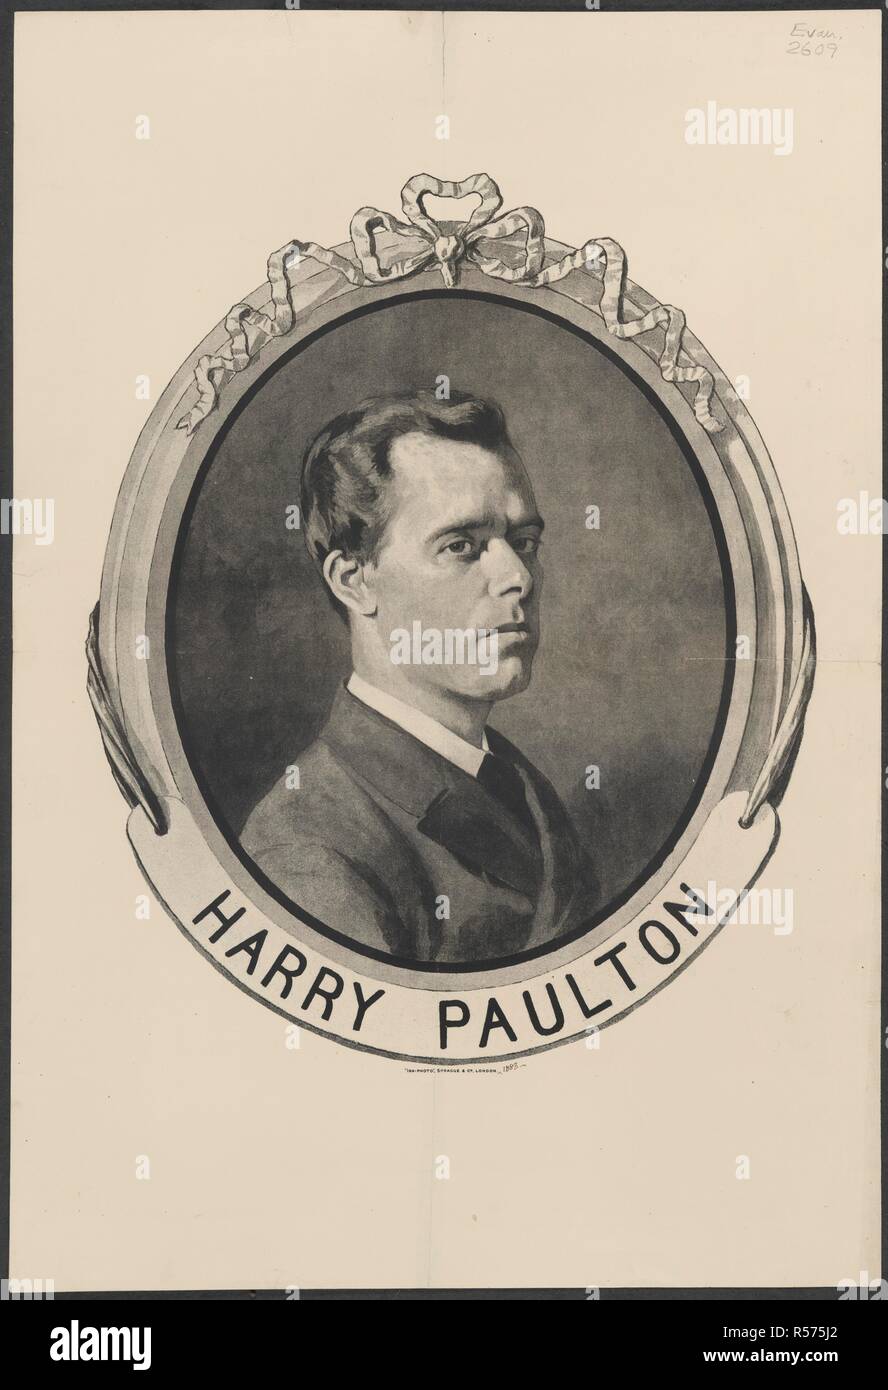 Harry Paulton. A collection of pamphlets, handbills, and miscella. London, 1800 - 1895. Harry Paulton (1842-1917). Actor and playwright. Portrait.  Image taken from A collection of pamphlets, handbills, and miscellaneous printed matter relating to Victorian entertainment and everyday life.  Originally published/produced in London, 1800 - 1895. . Source: EVAN.2609,. Language: English. Stock Photo